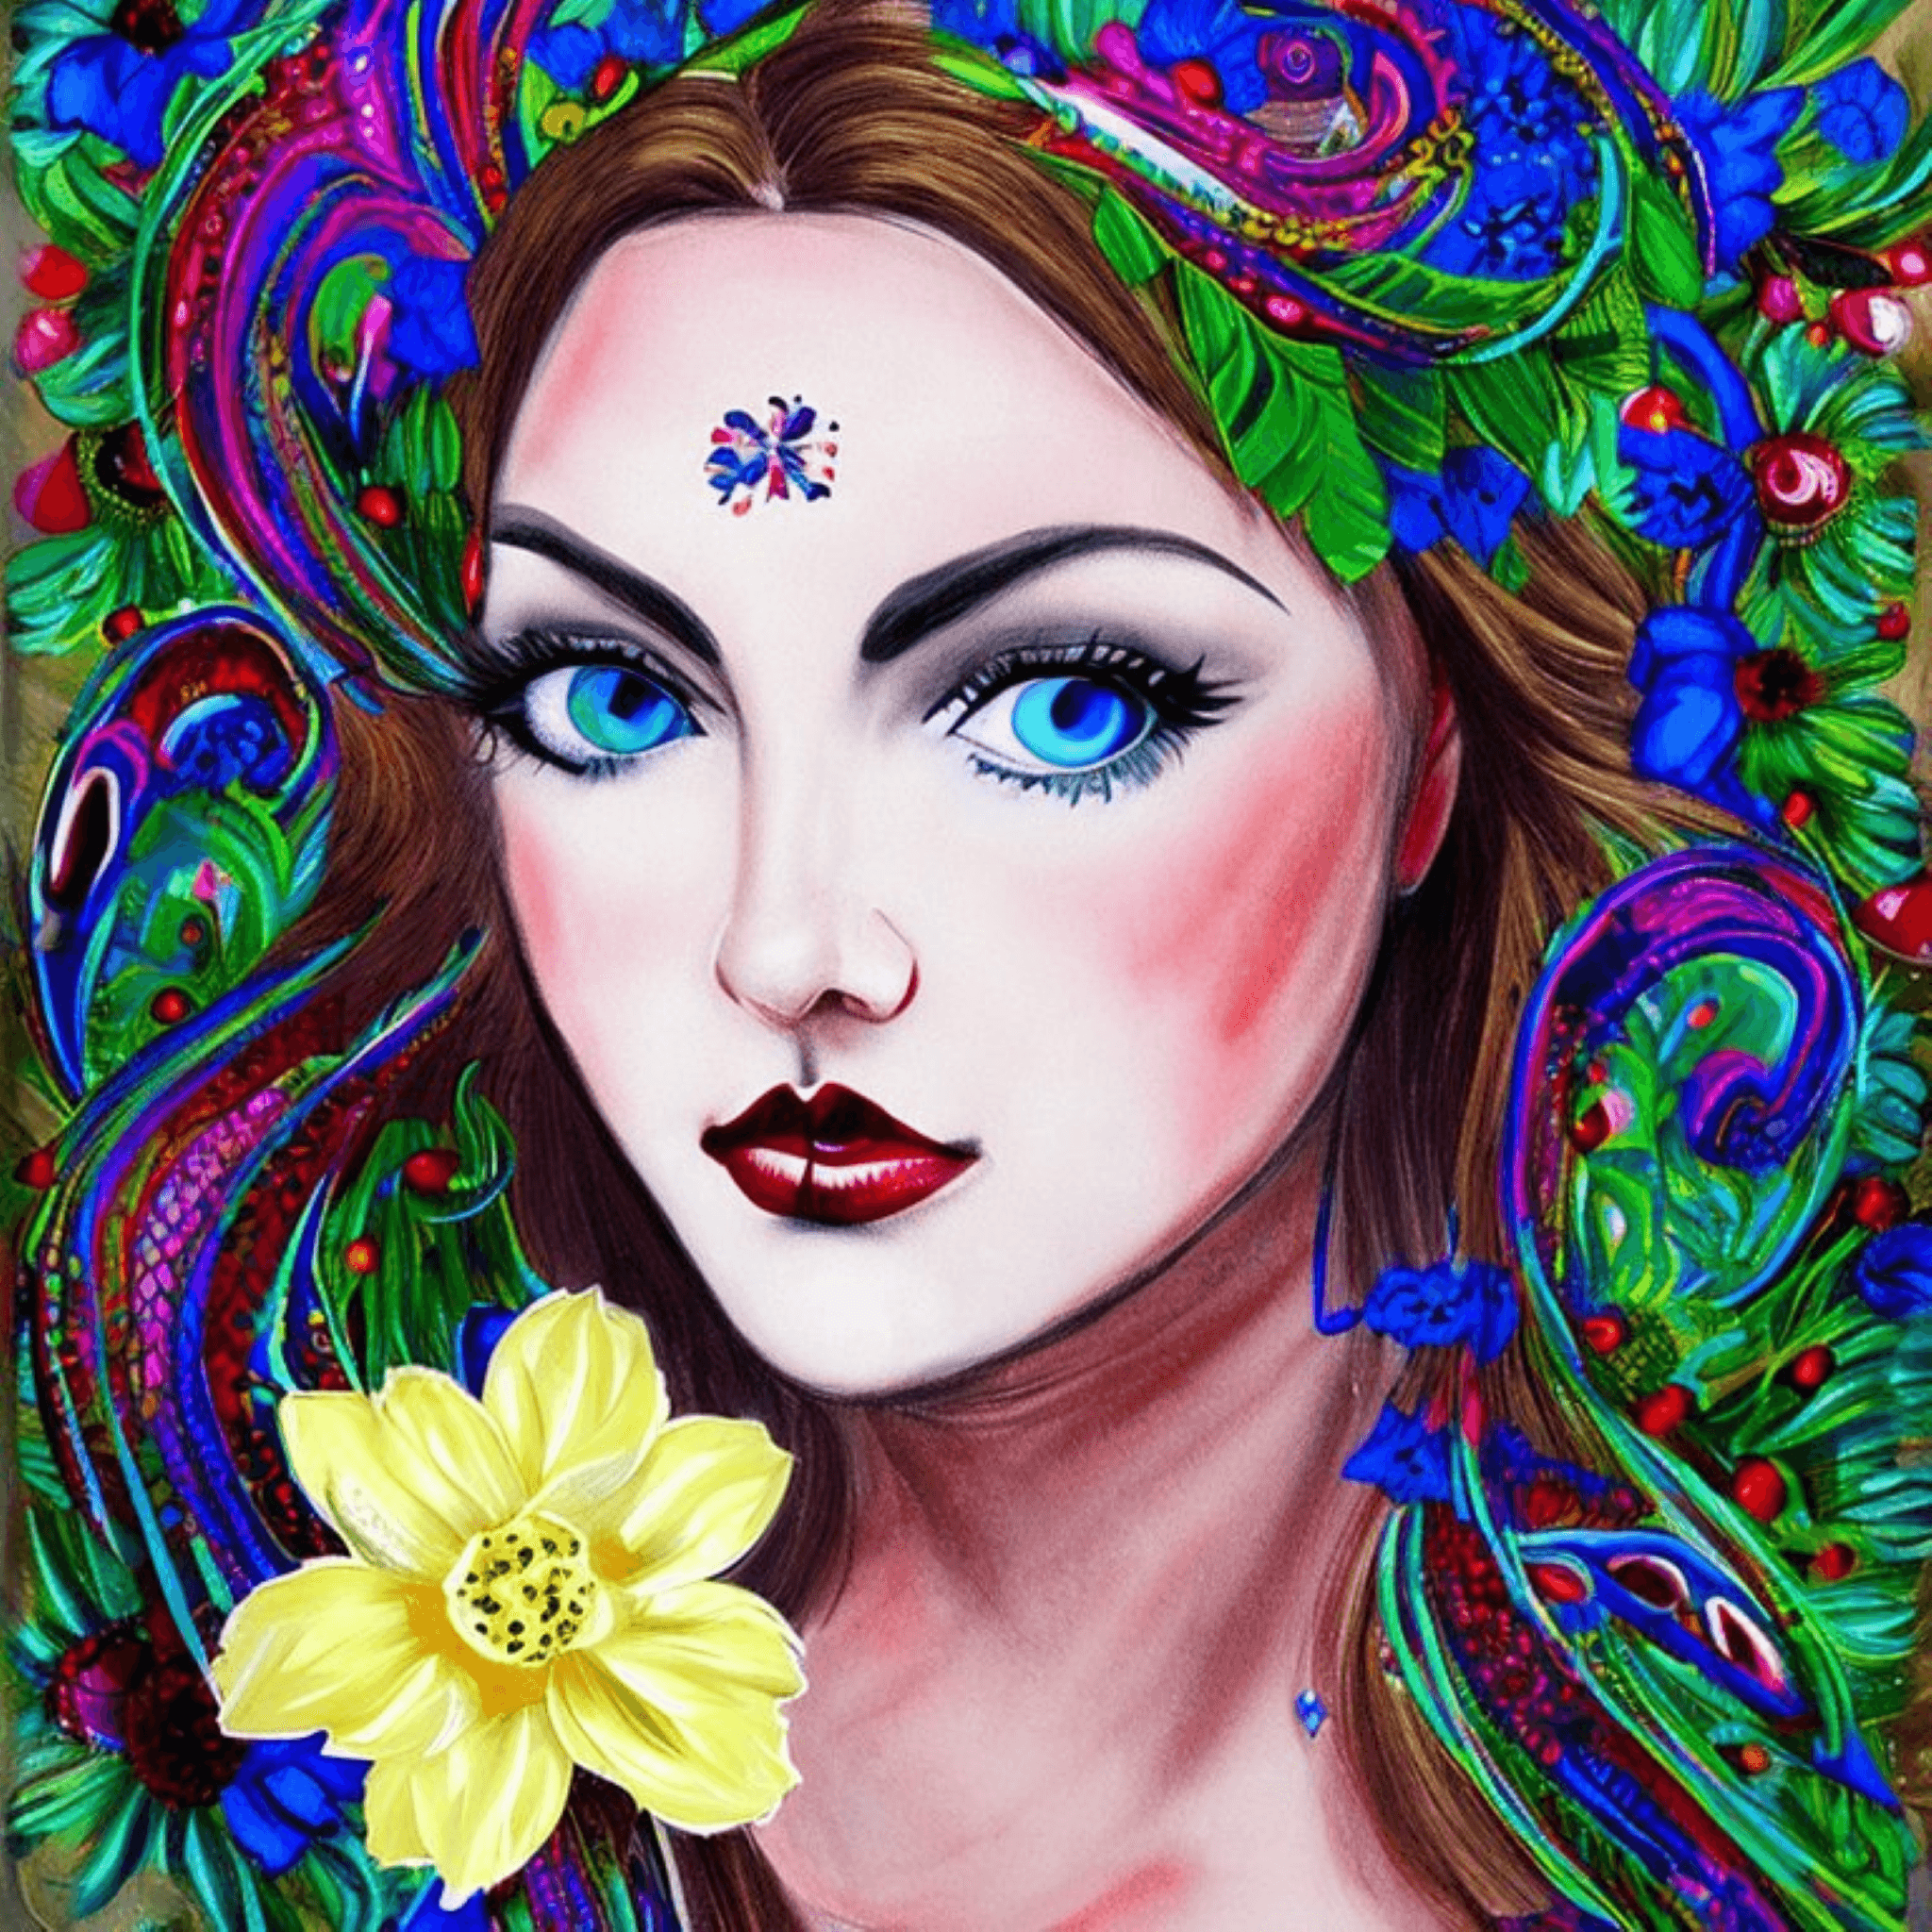 Art Acrylic Painting of a Woman with Blue Eyes and Roses